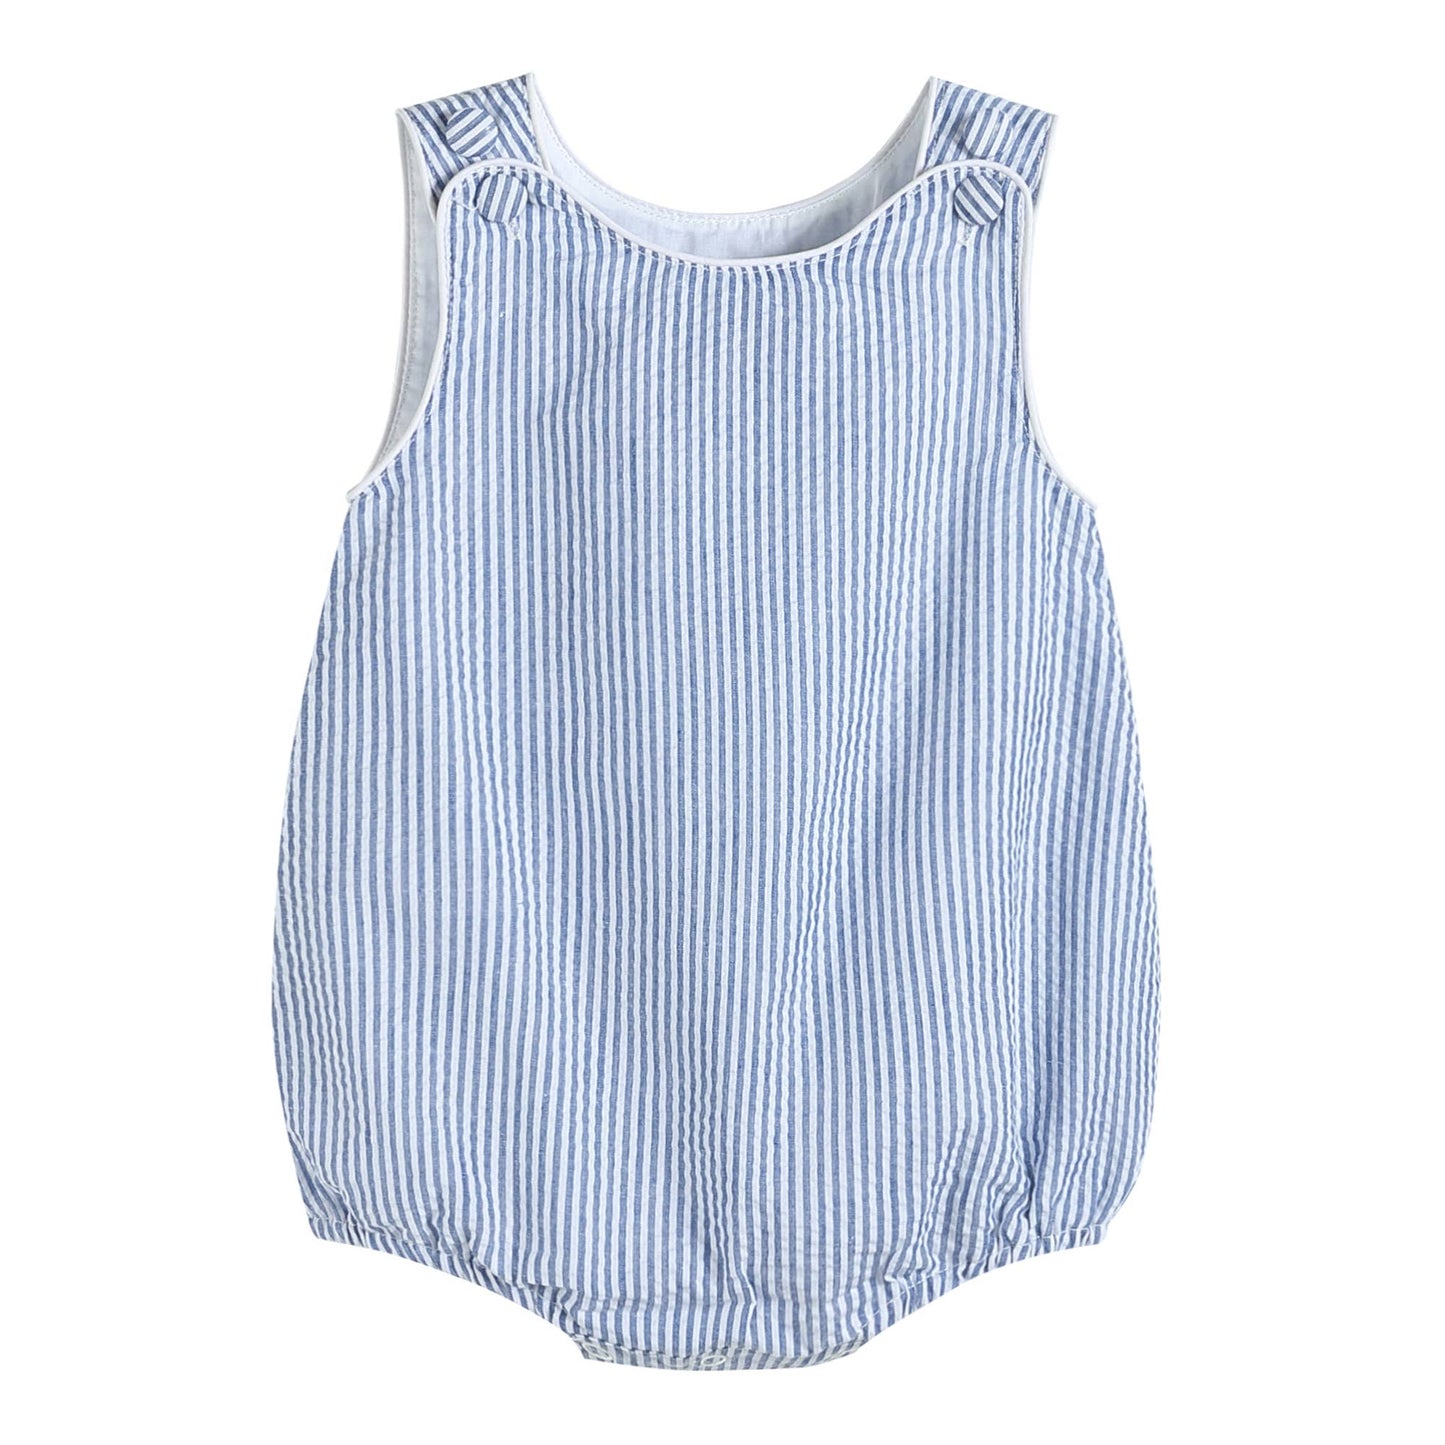 A baby boy's Classic Dark Blue Seersucker Baby Bubble Romper: 3-6M with blue and white stripes, featuring delicate embroidery by Lil Cactus.